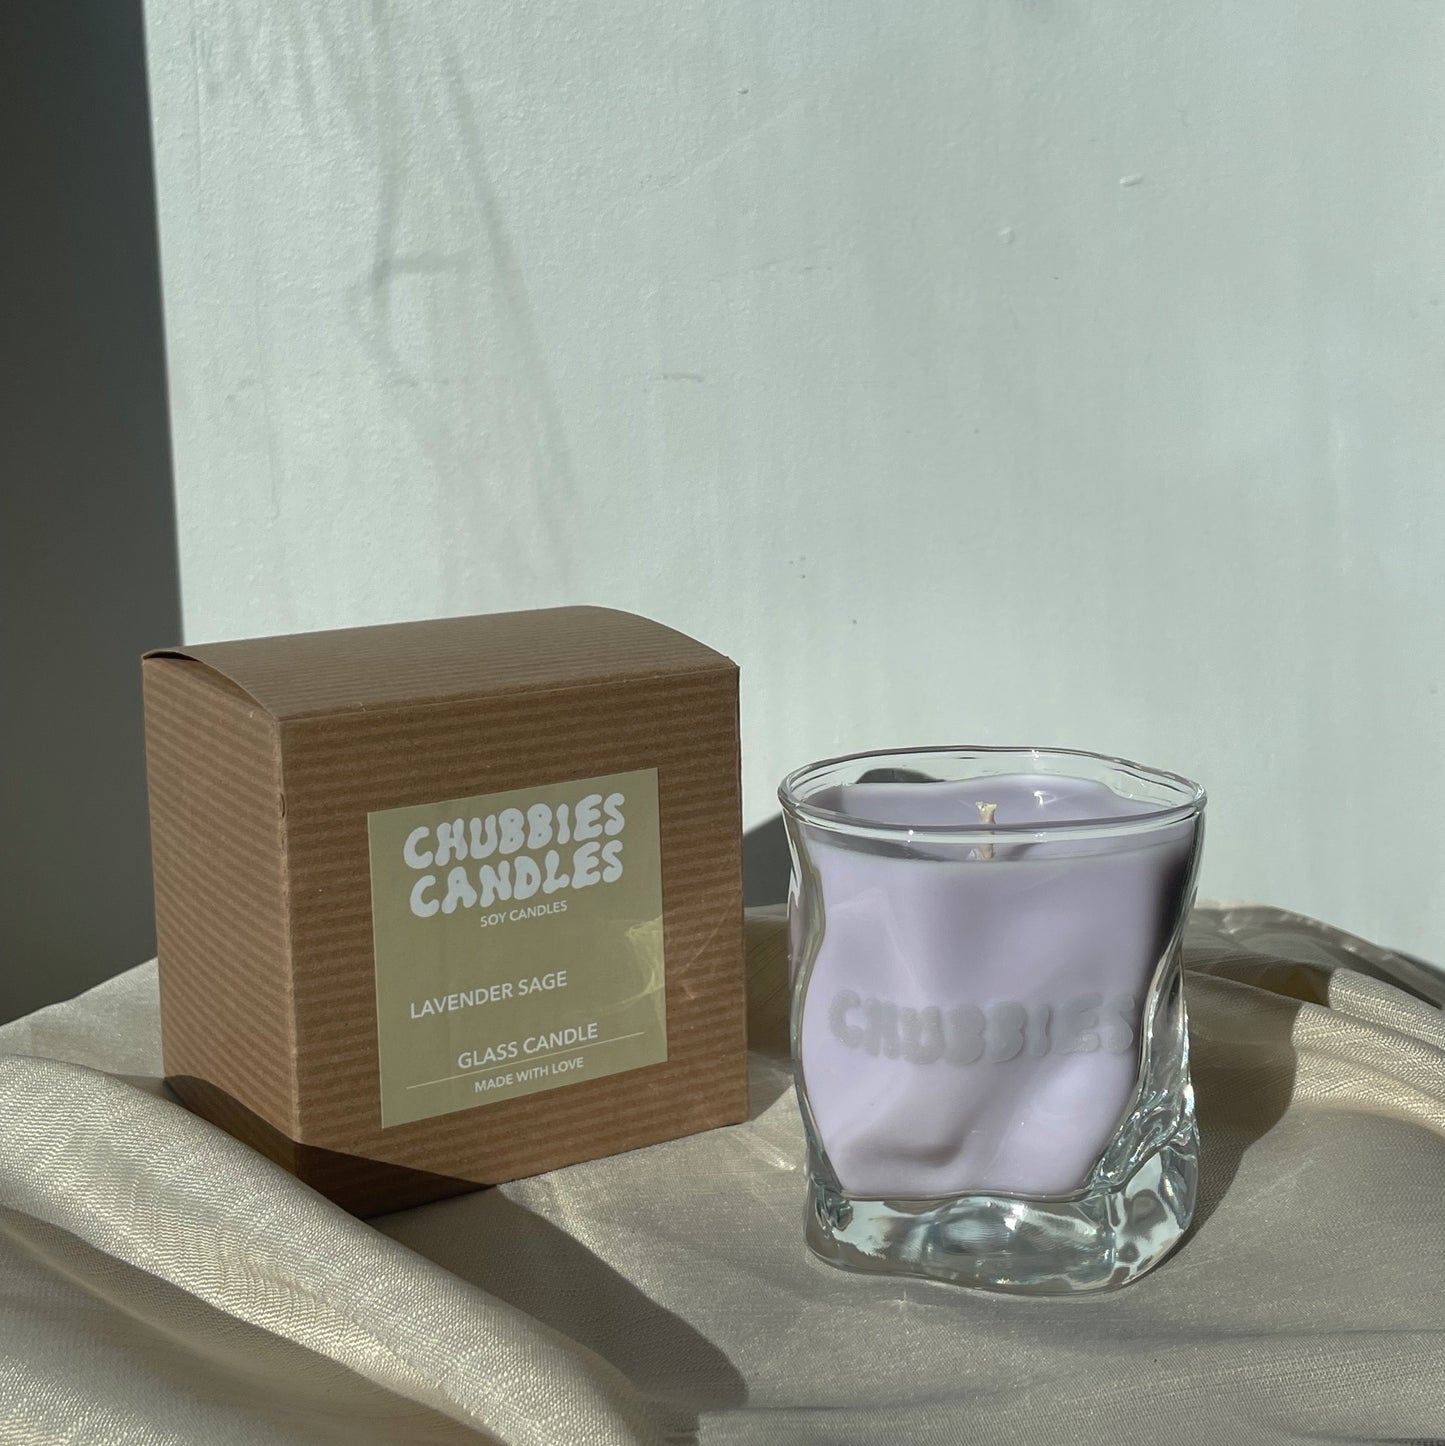 Scented Soy Candle by Chubbies